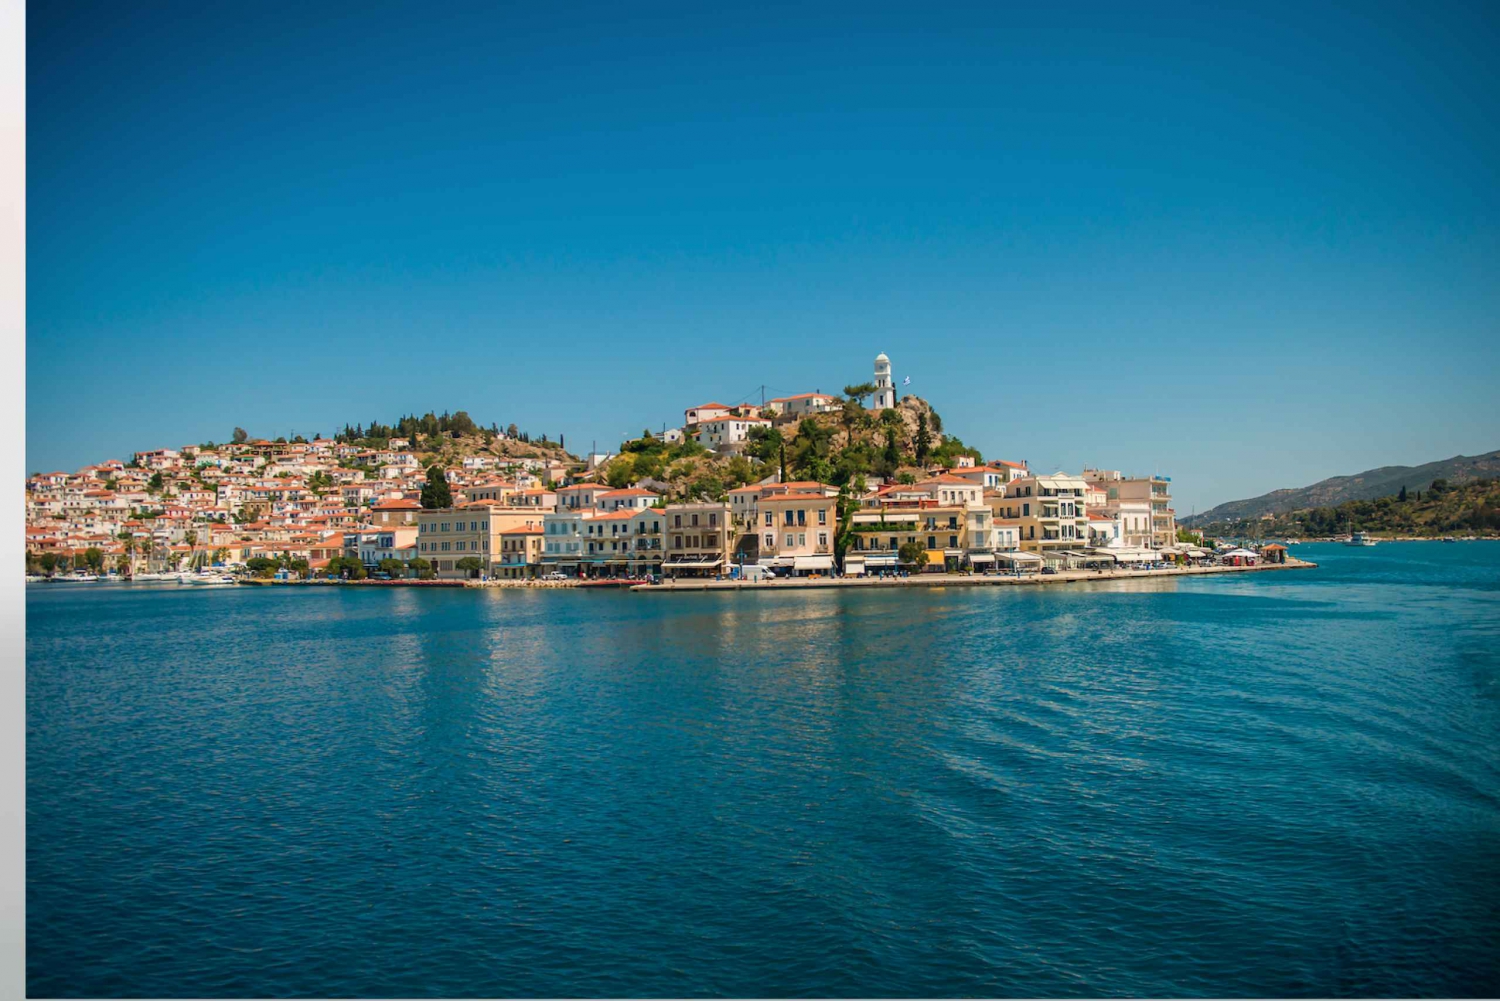 From Athens: Day Cruise of the Saronic Islands